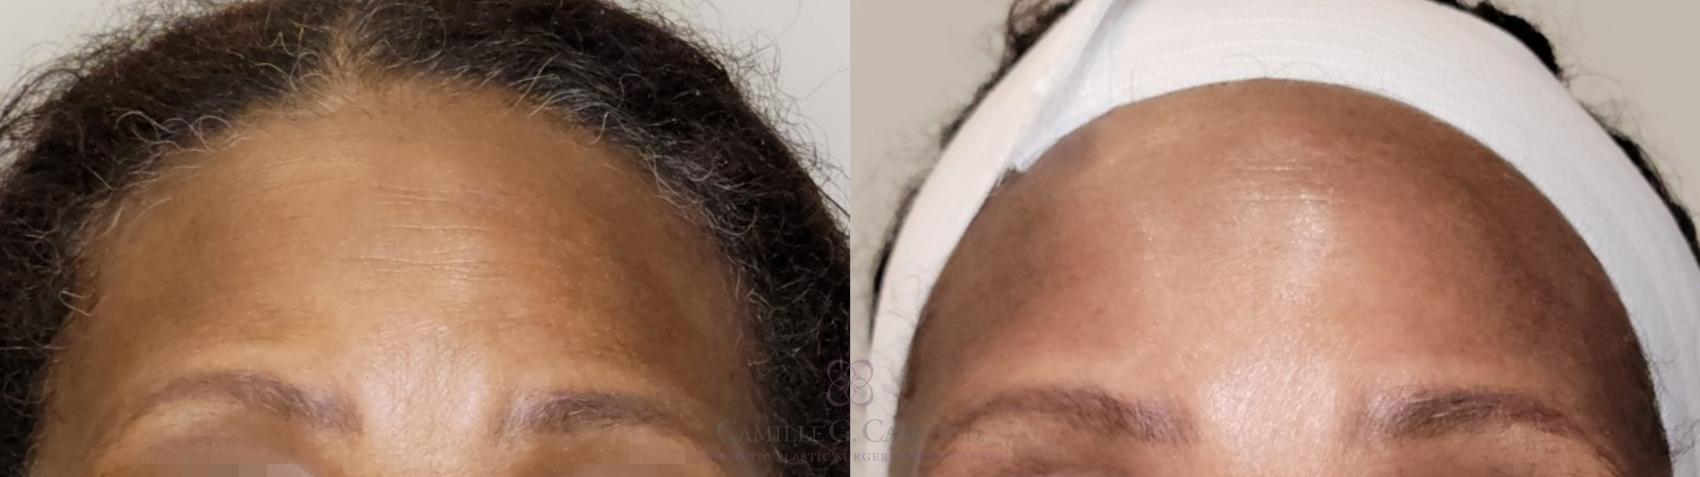 Before & After Chemical Peels Case 559 front upper View in Houston, TX